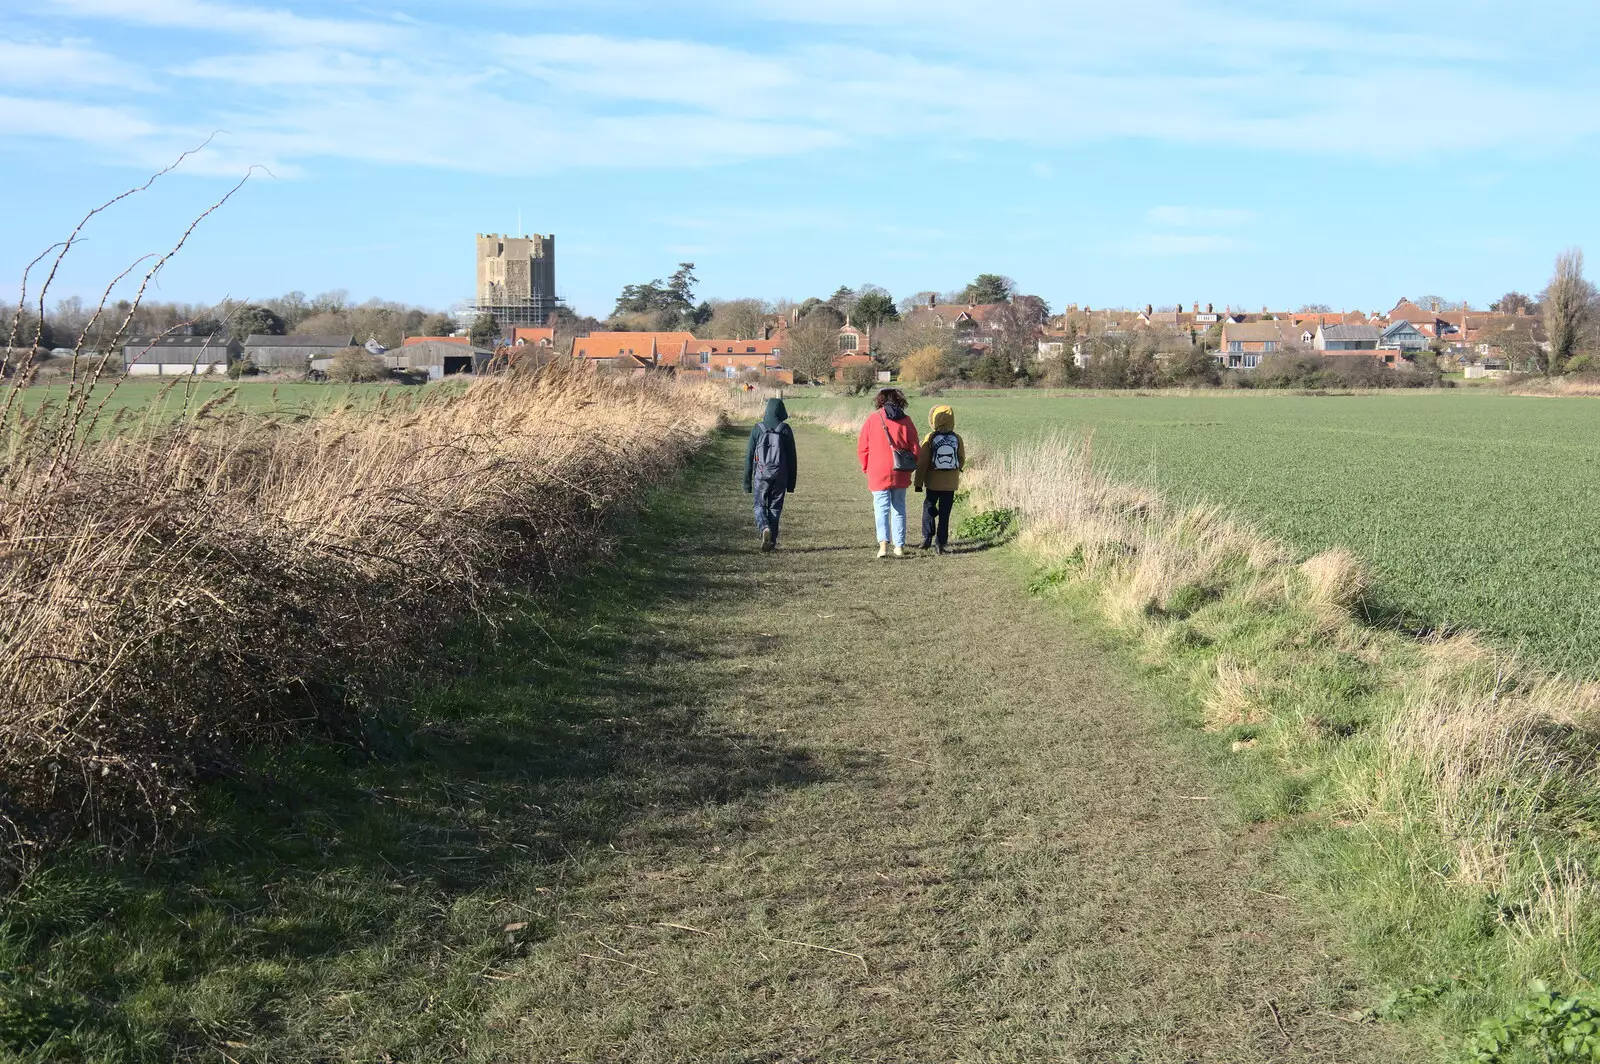 On the path to Orford, from A Trip to Orford Castle, Orford, Suffolk - 26th February 2022